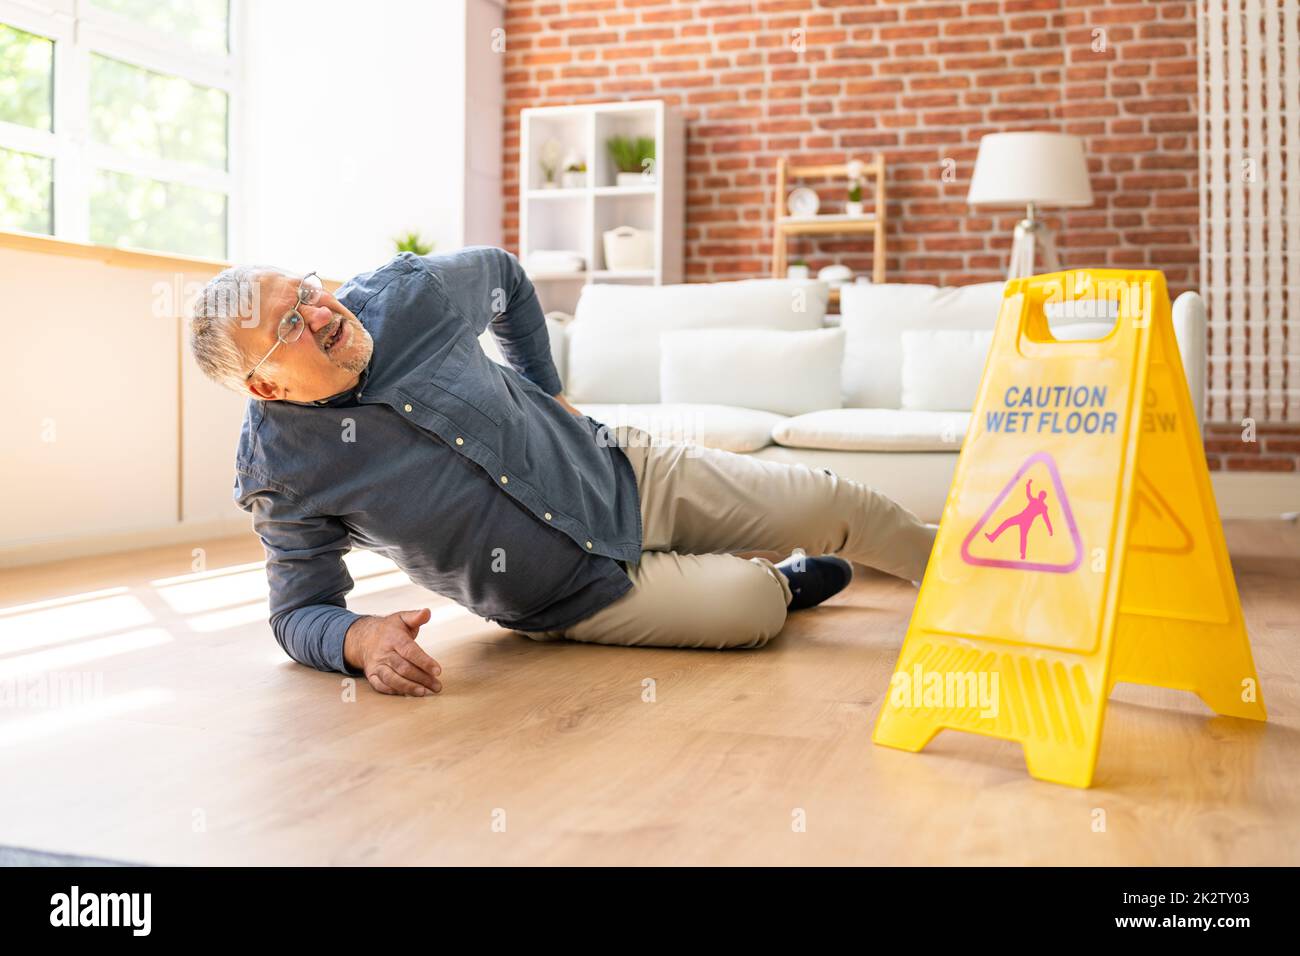 Man Falling On Wet Floor In Front Of Caution Sign Stock Photo